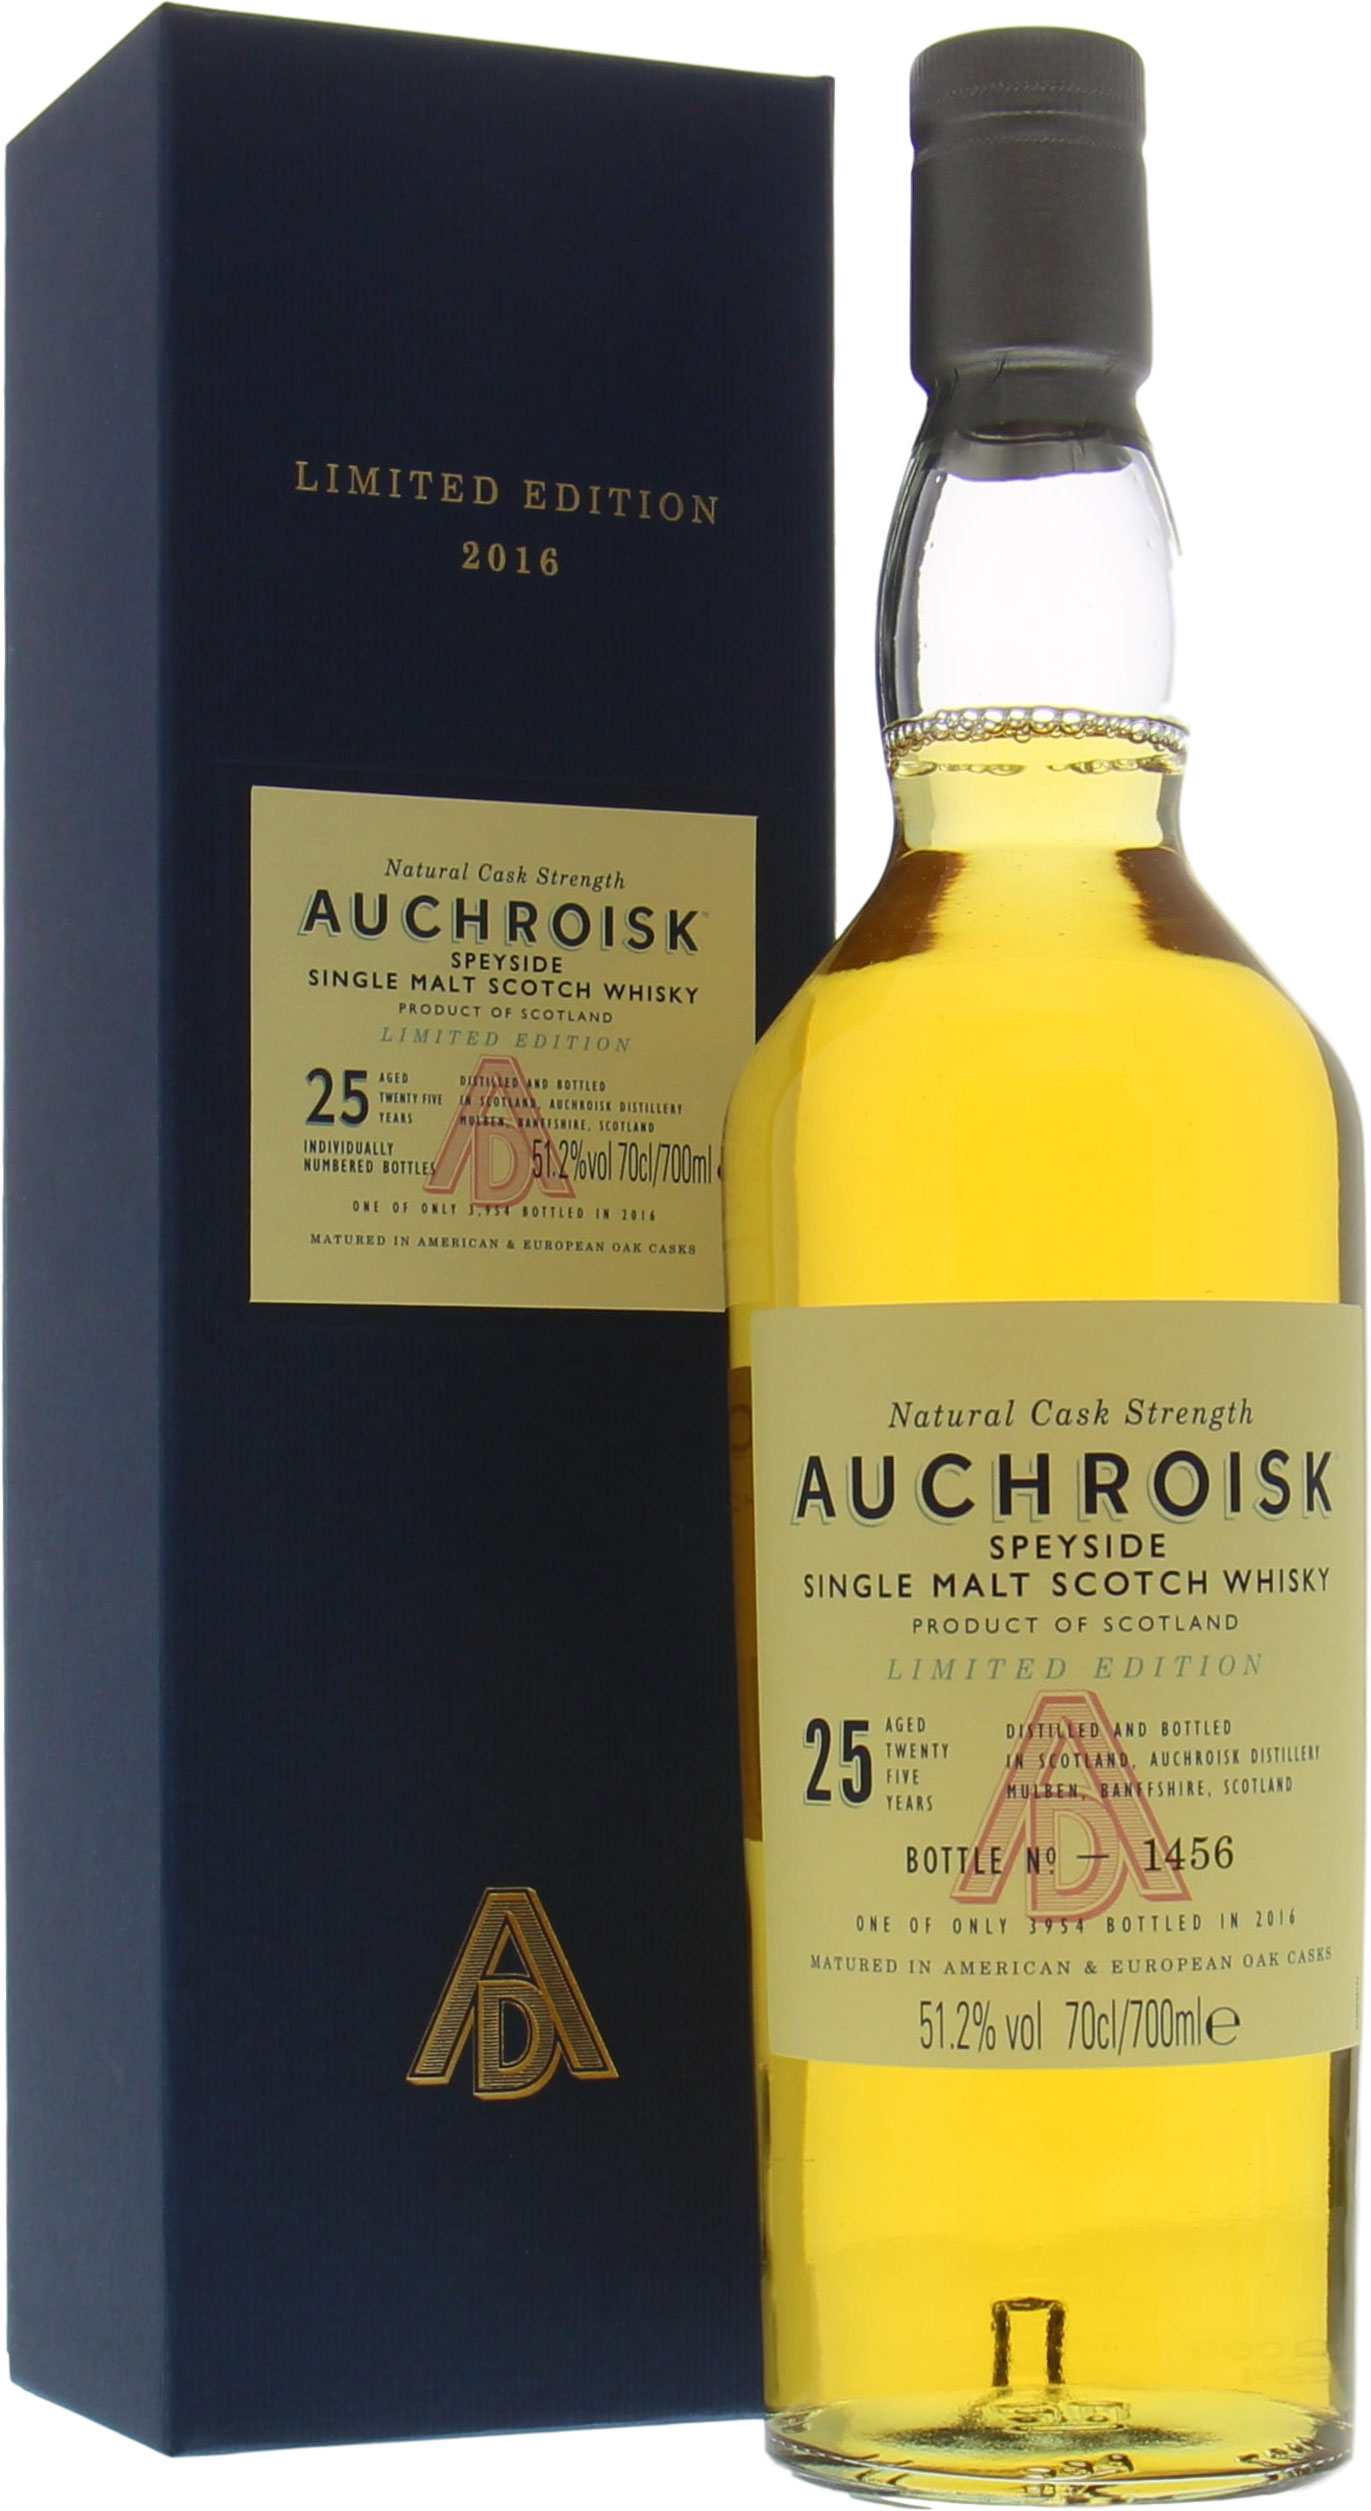 Auchroisk - 25 Years Old Diageo Special Release 2016 51.2% NV